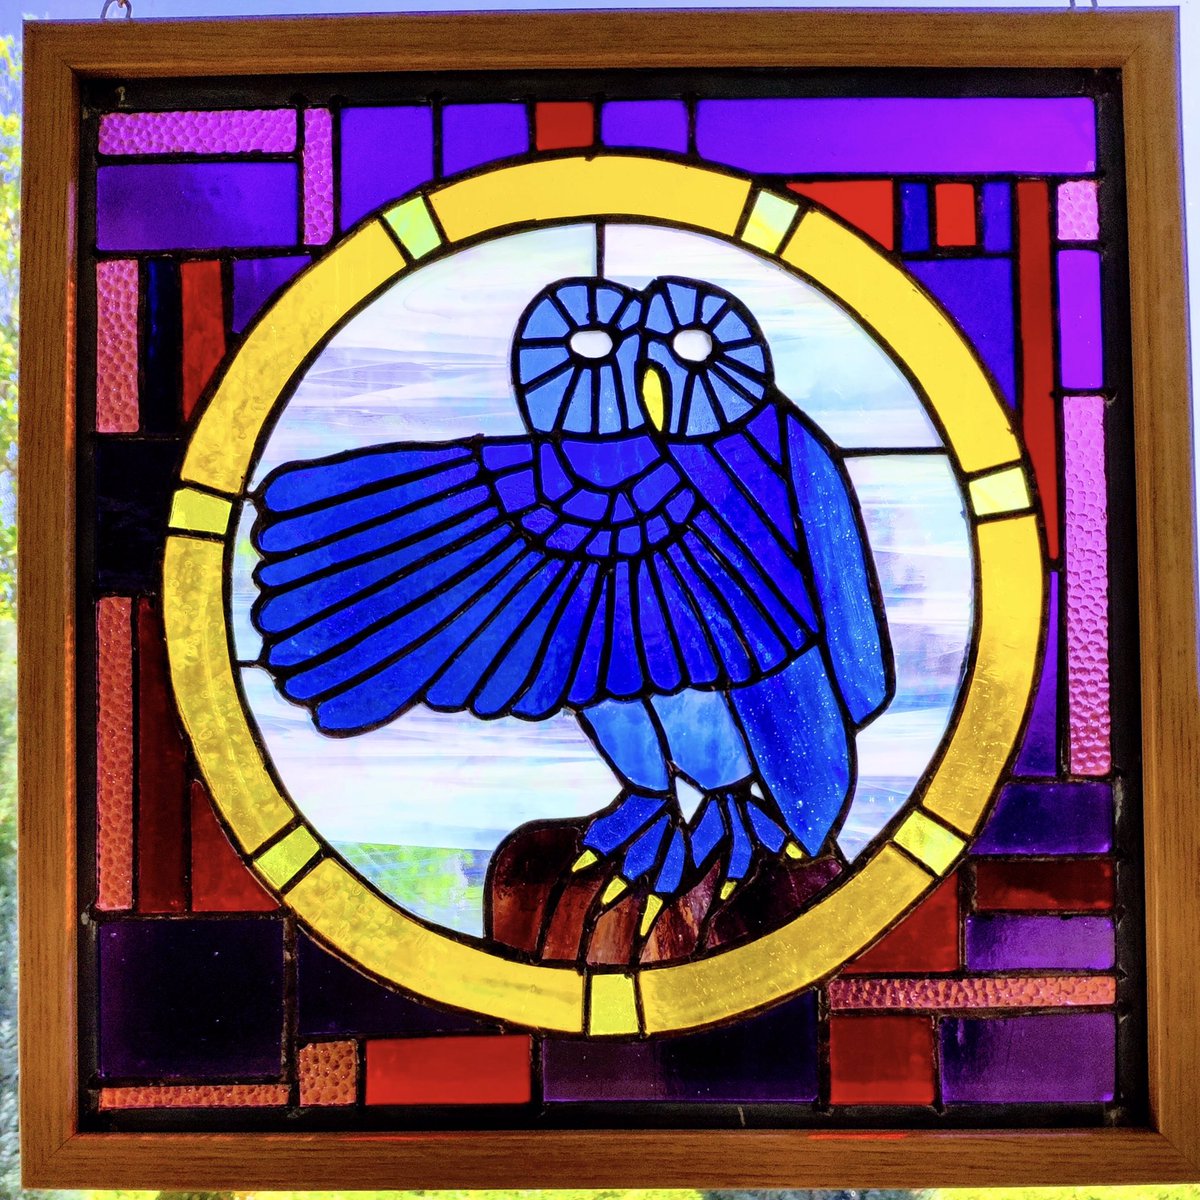 Sending an Owl to the #covhour folk. Hope you are all well. p.s. We are a family of Harry Potter fans. #dolittleglass #stainedglassart